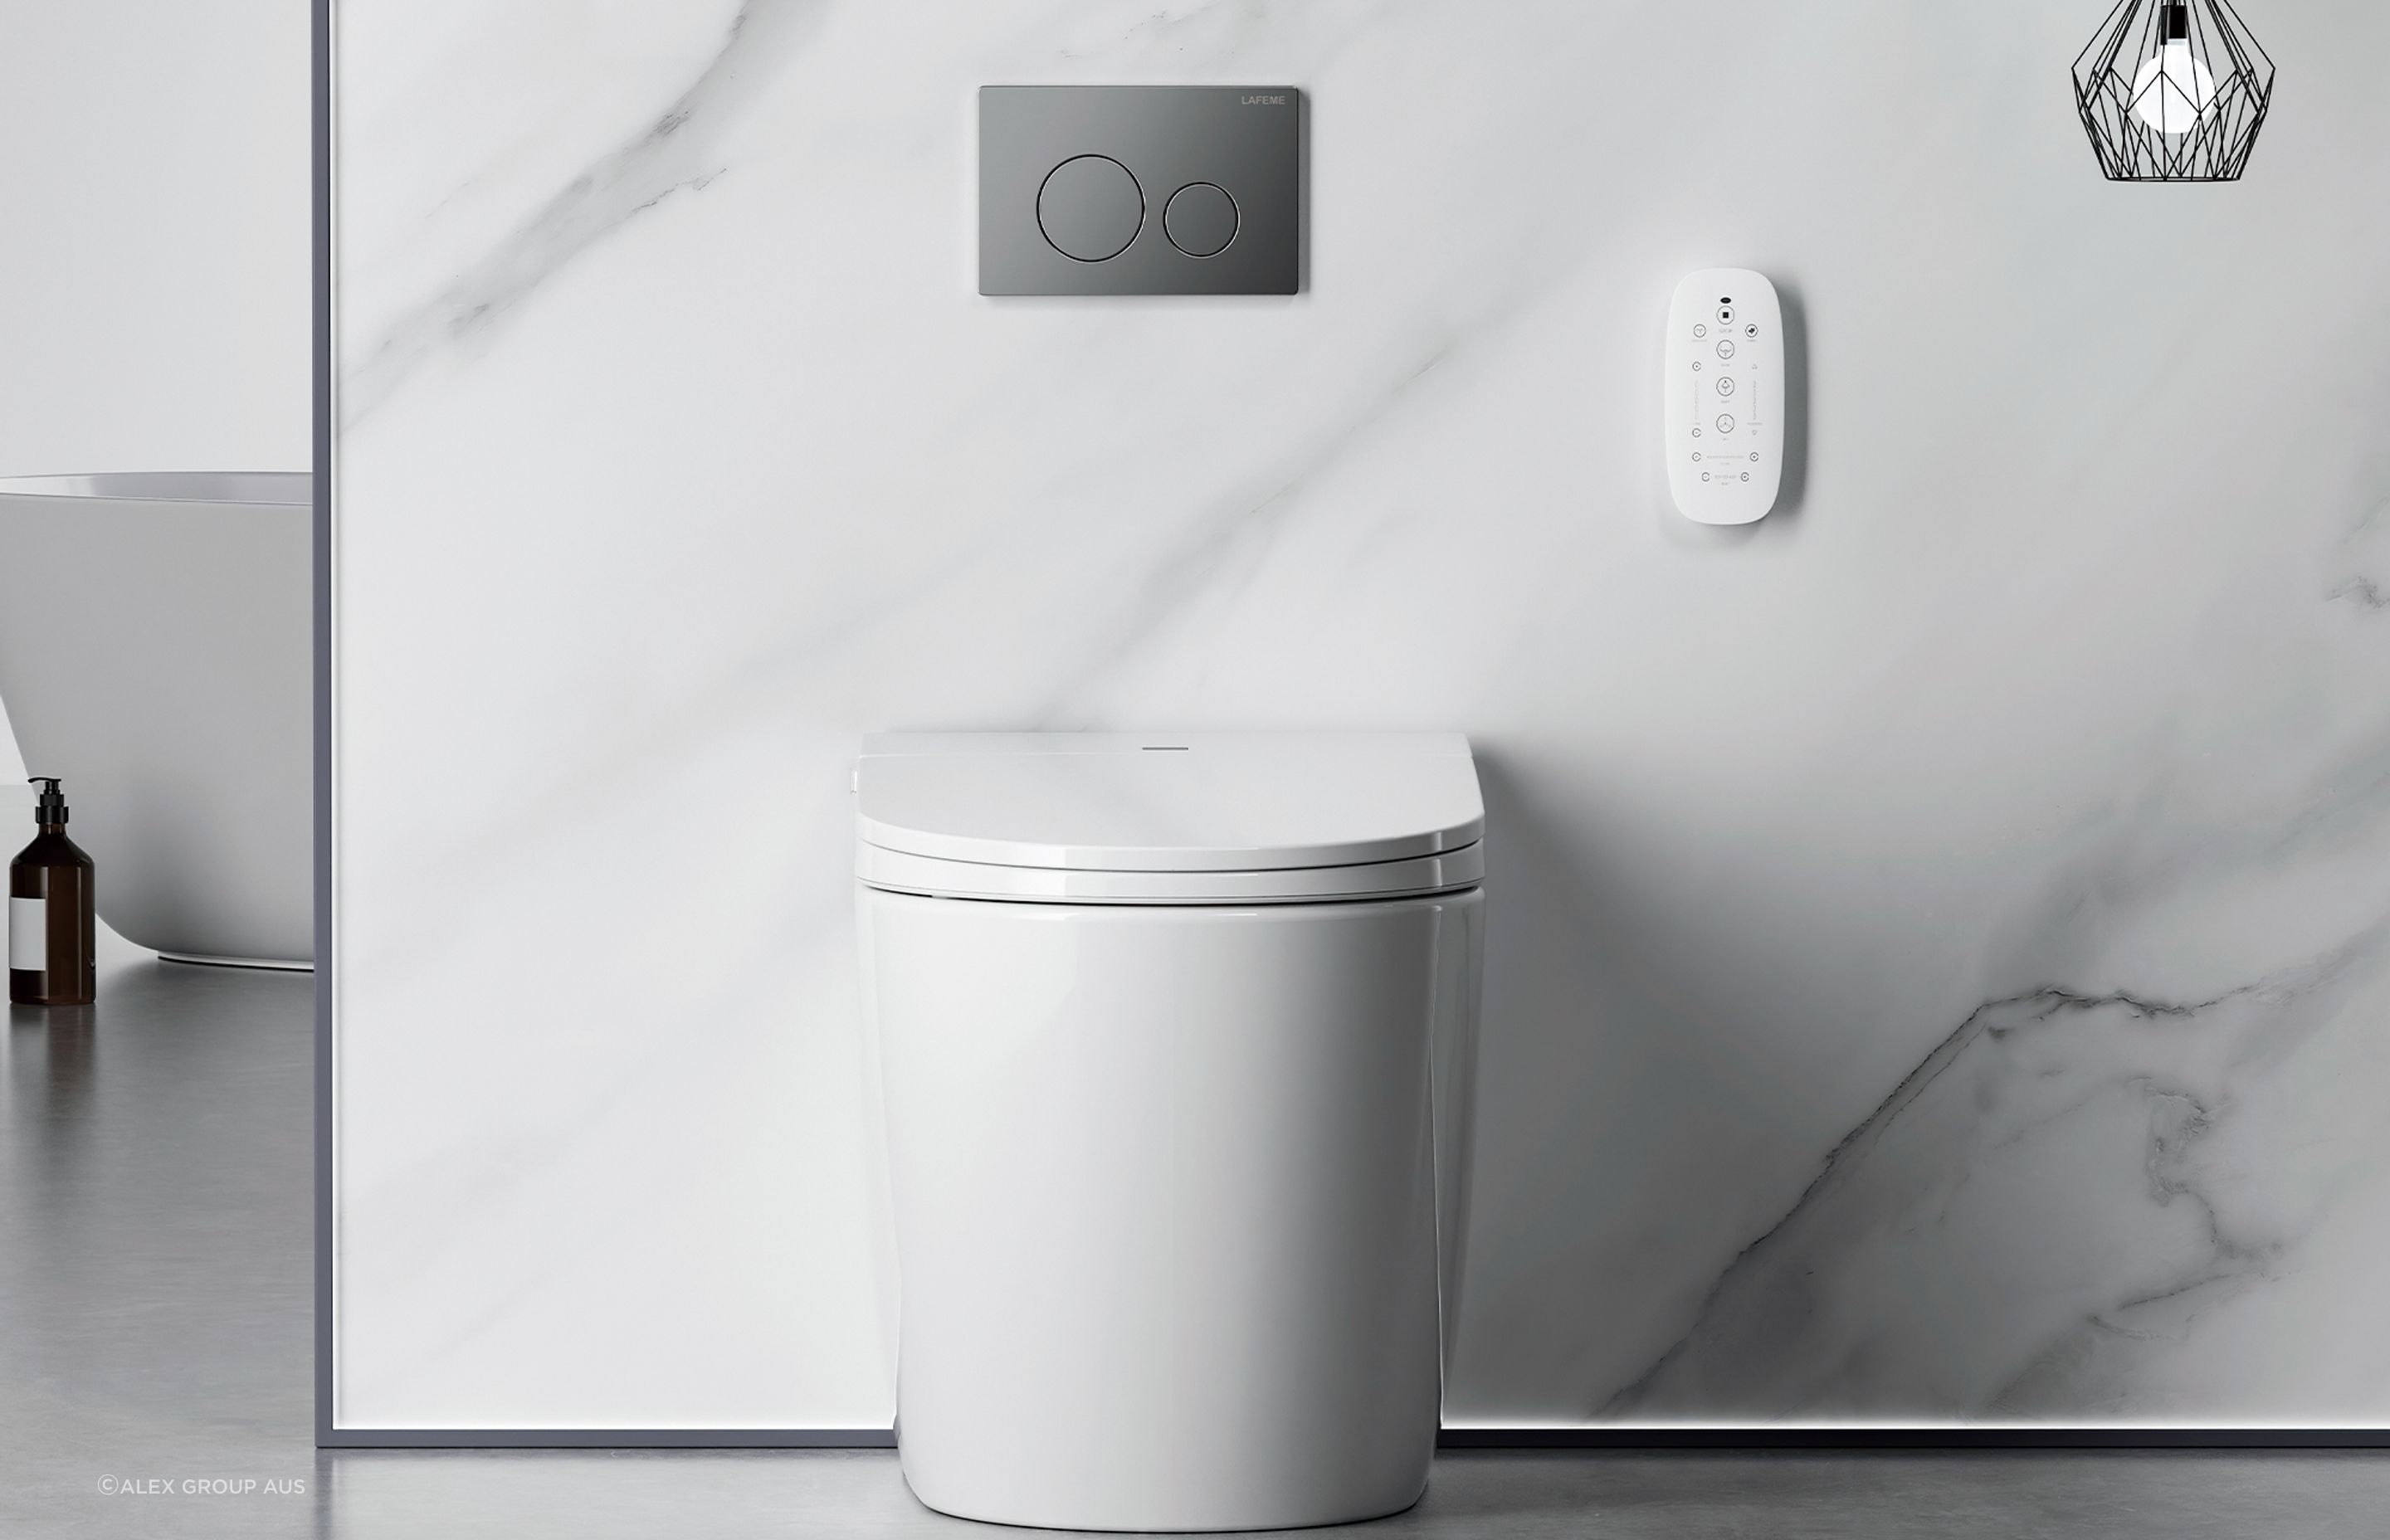 Most smart toilets come with a handy remote control, giving you an array of advanced functions at your fingertips.